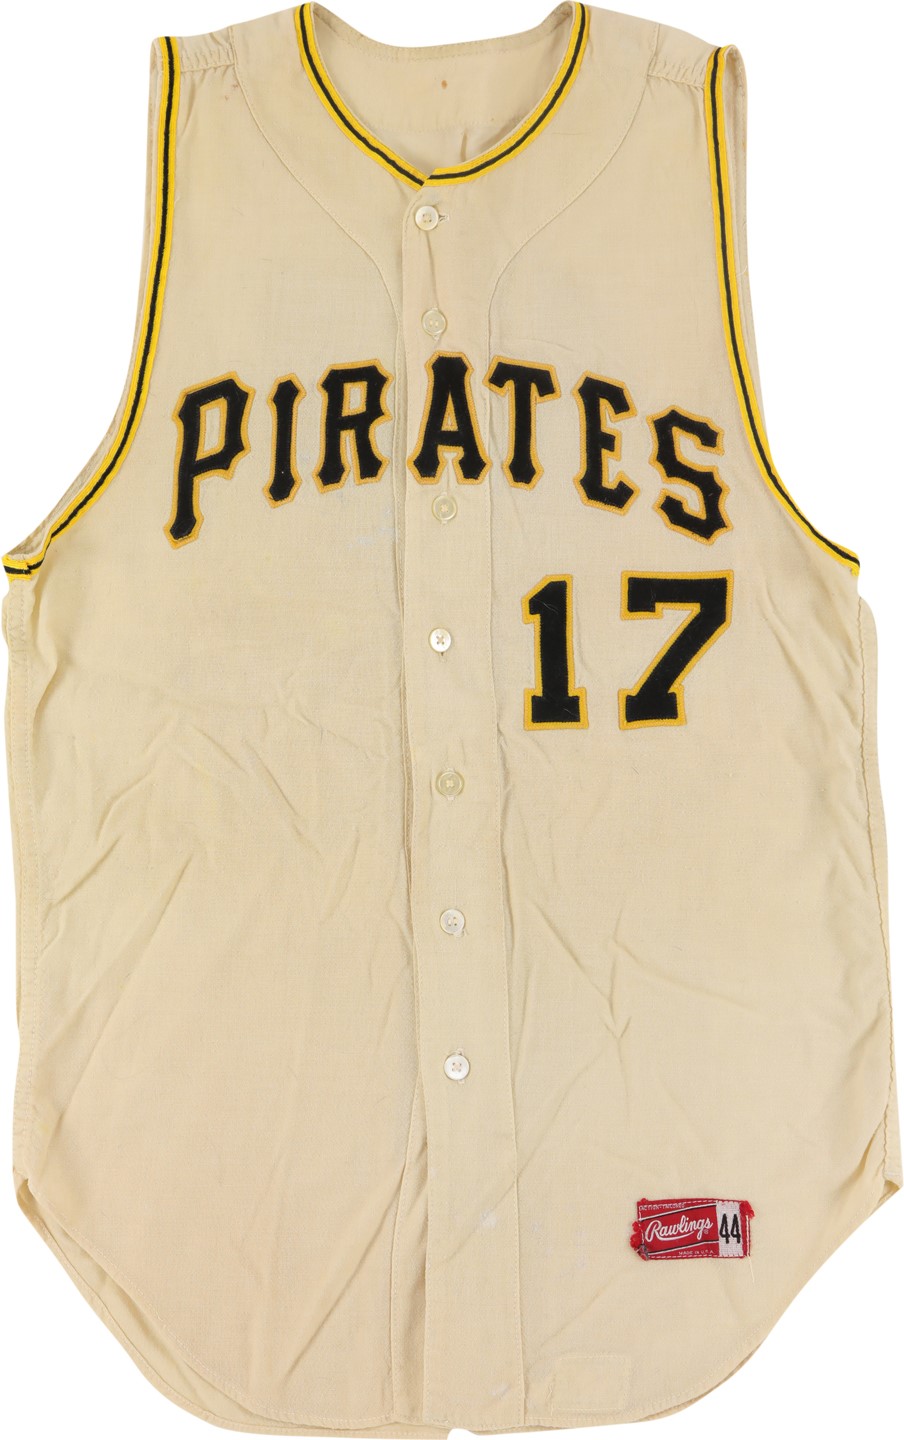 Clemente and Pittsburgh Pirates - 1965 Donn Clendenon Pittsburgh Pirates Game Worn Jersey